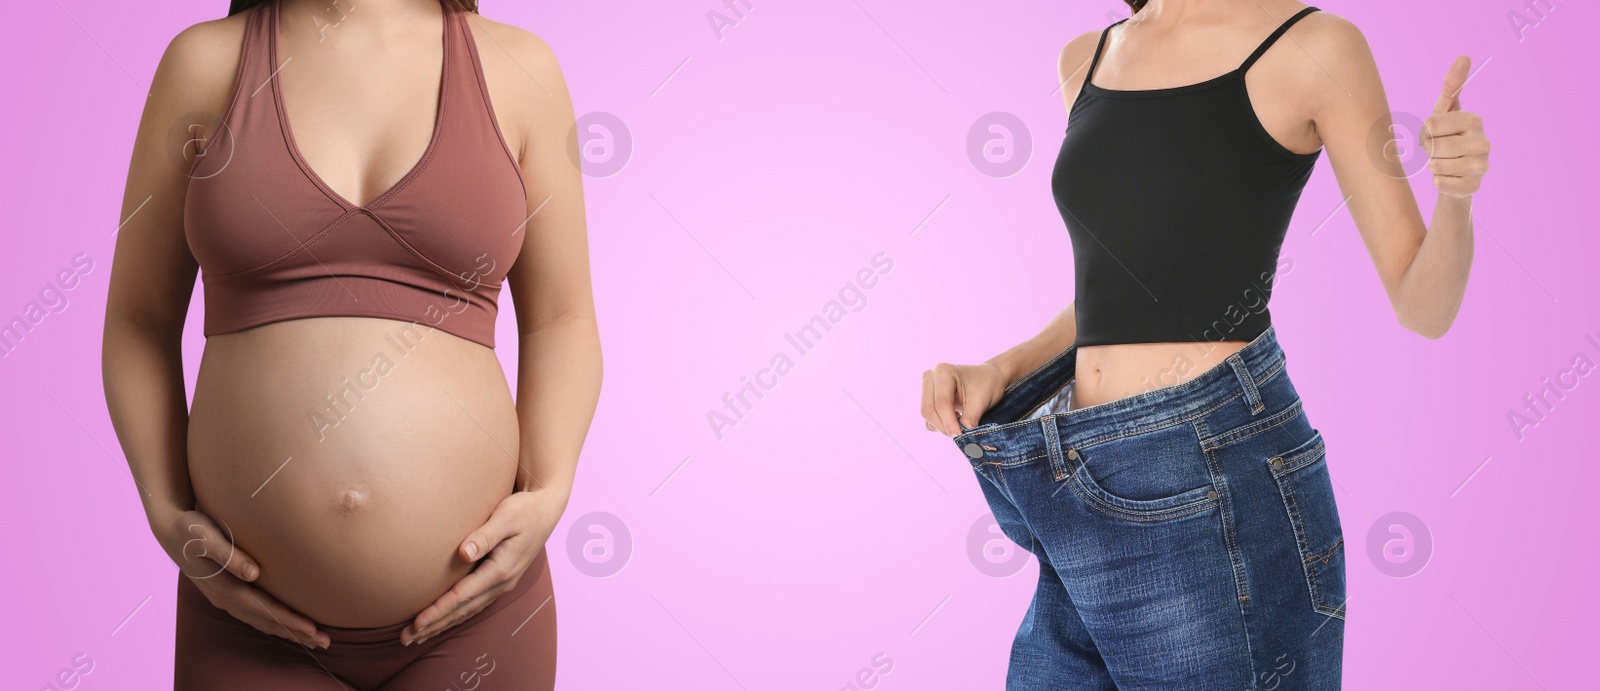 Image of Woman before and after childbirth on pink background, closeup view of belly. Collage